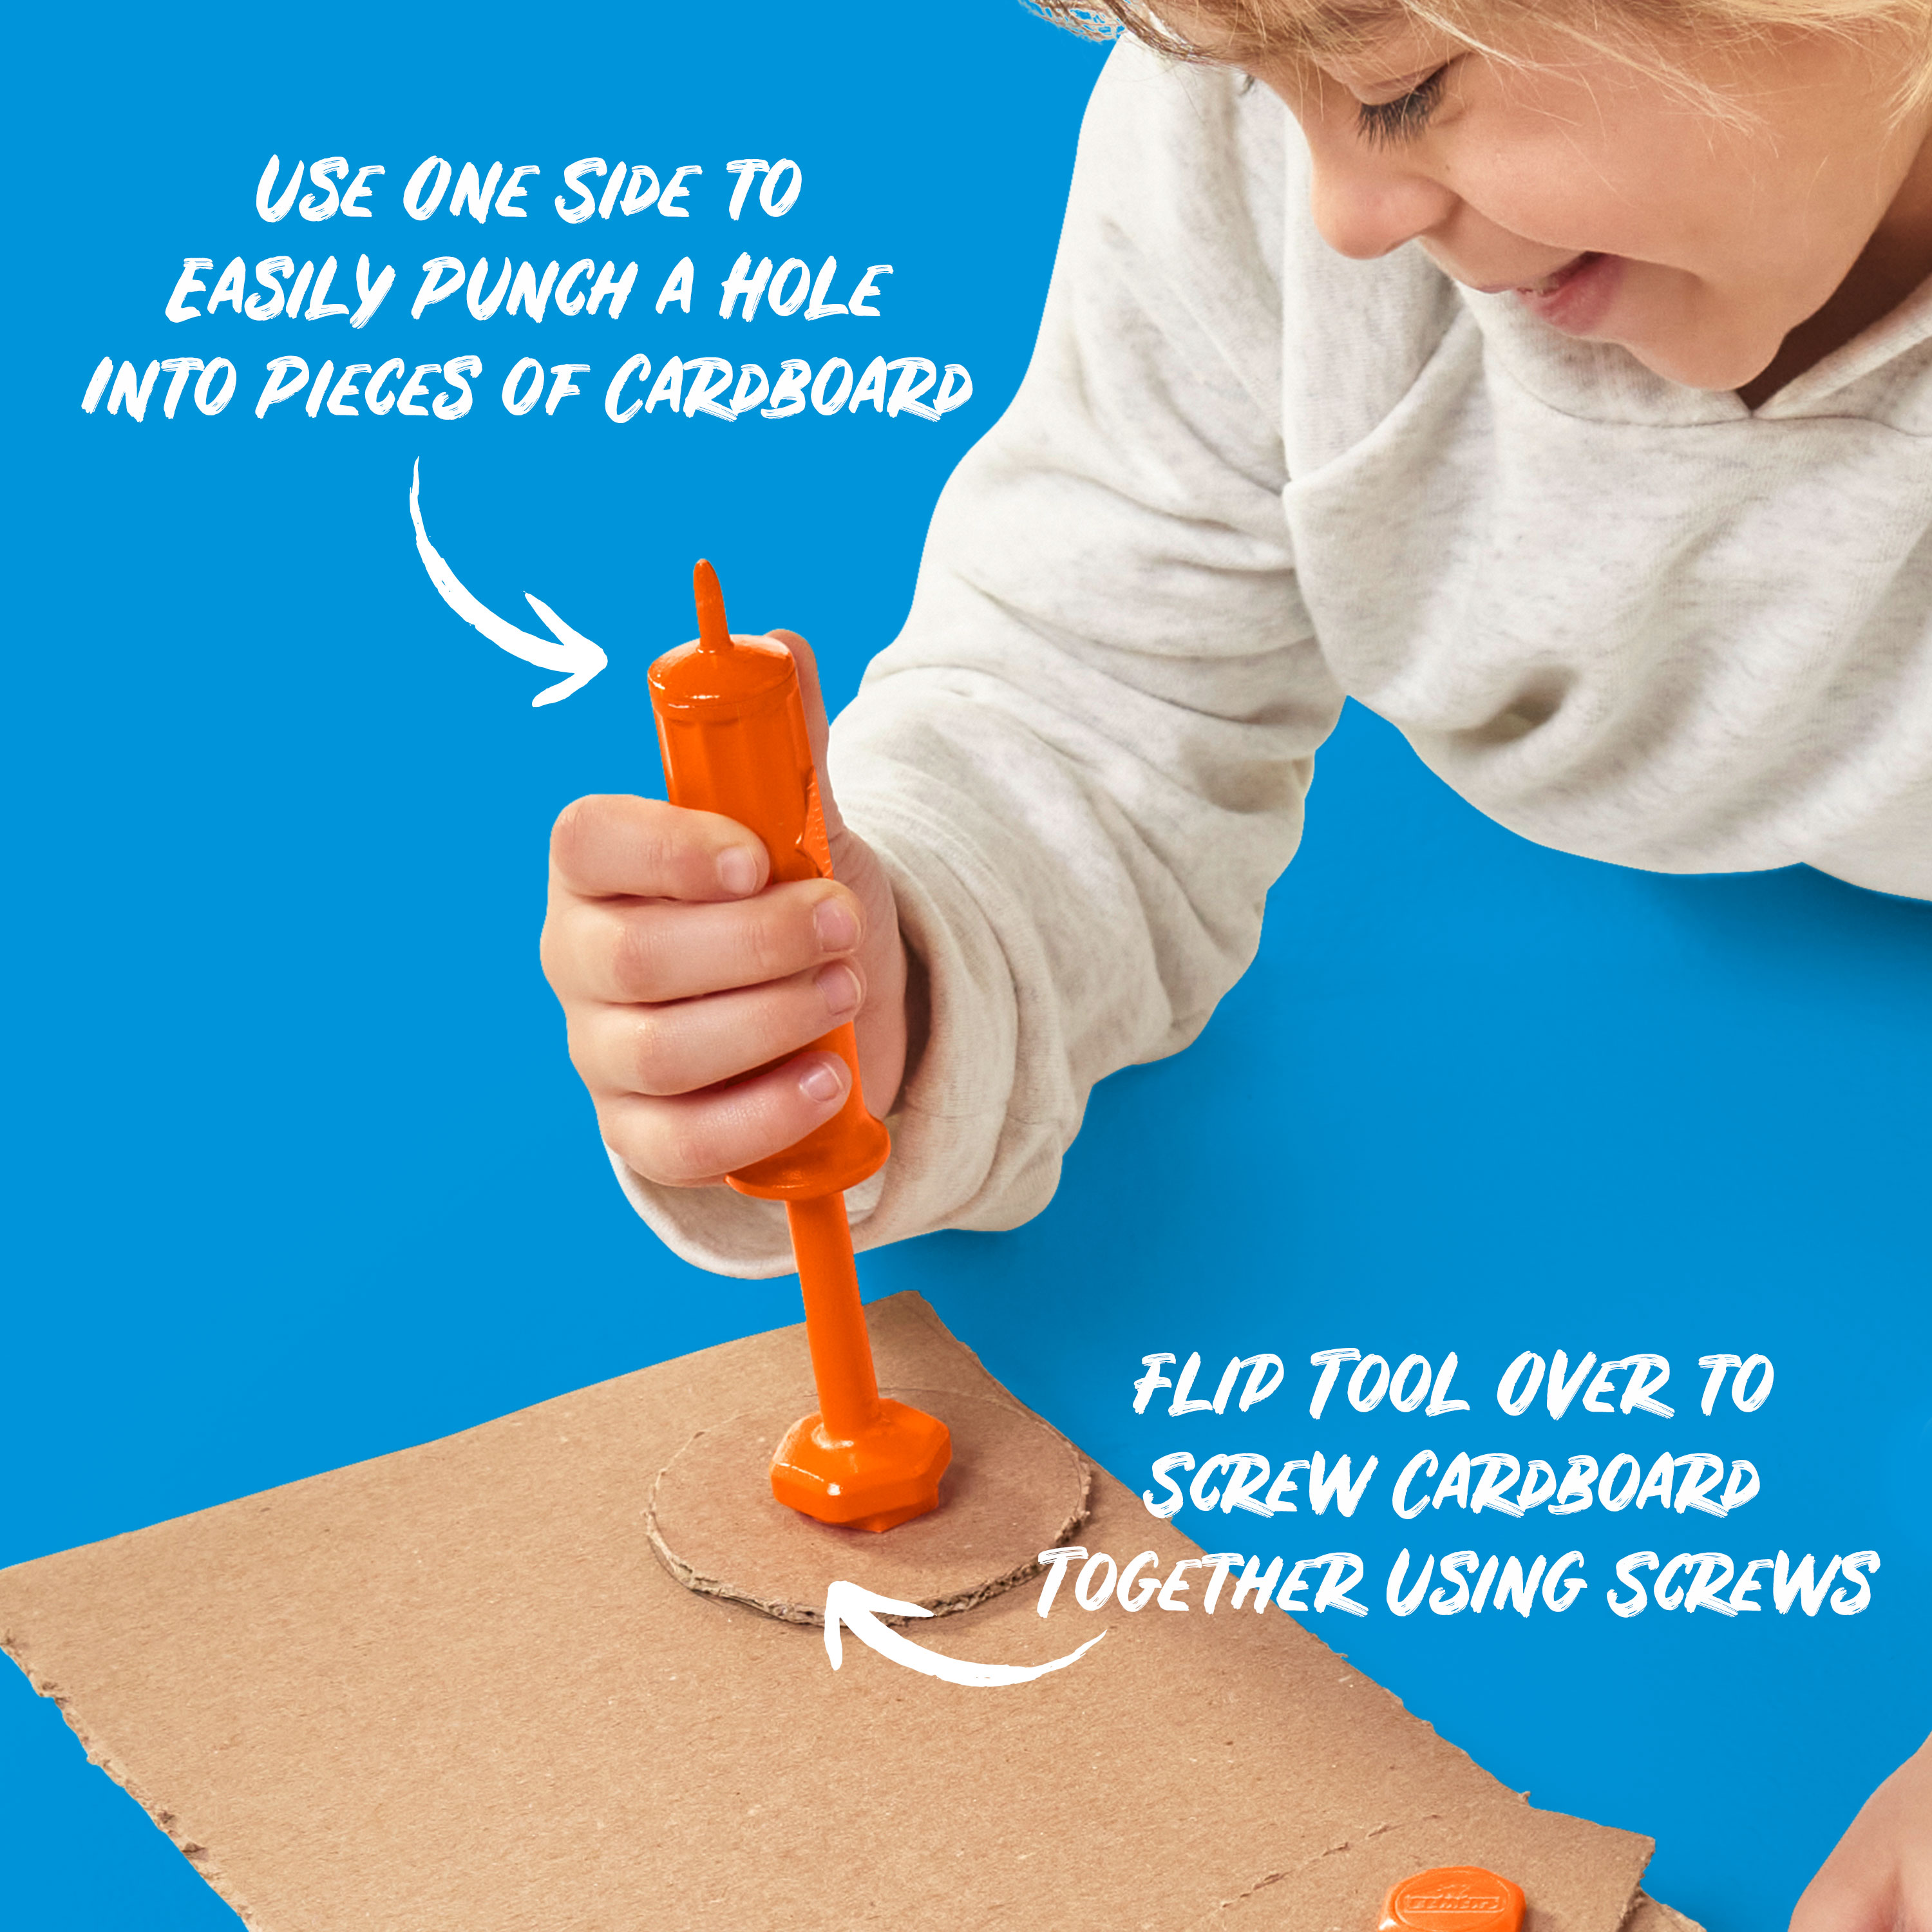 Elmer's Build It Tools - Cardboard Screwdriver and Holepunch